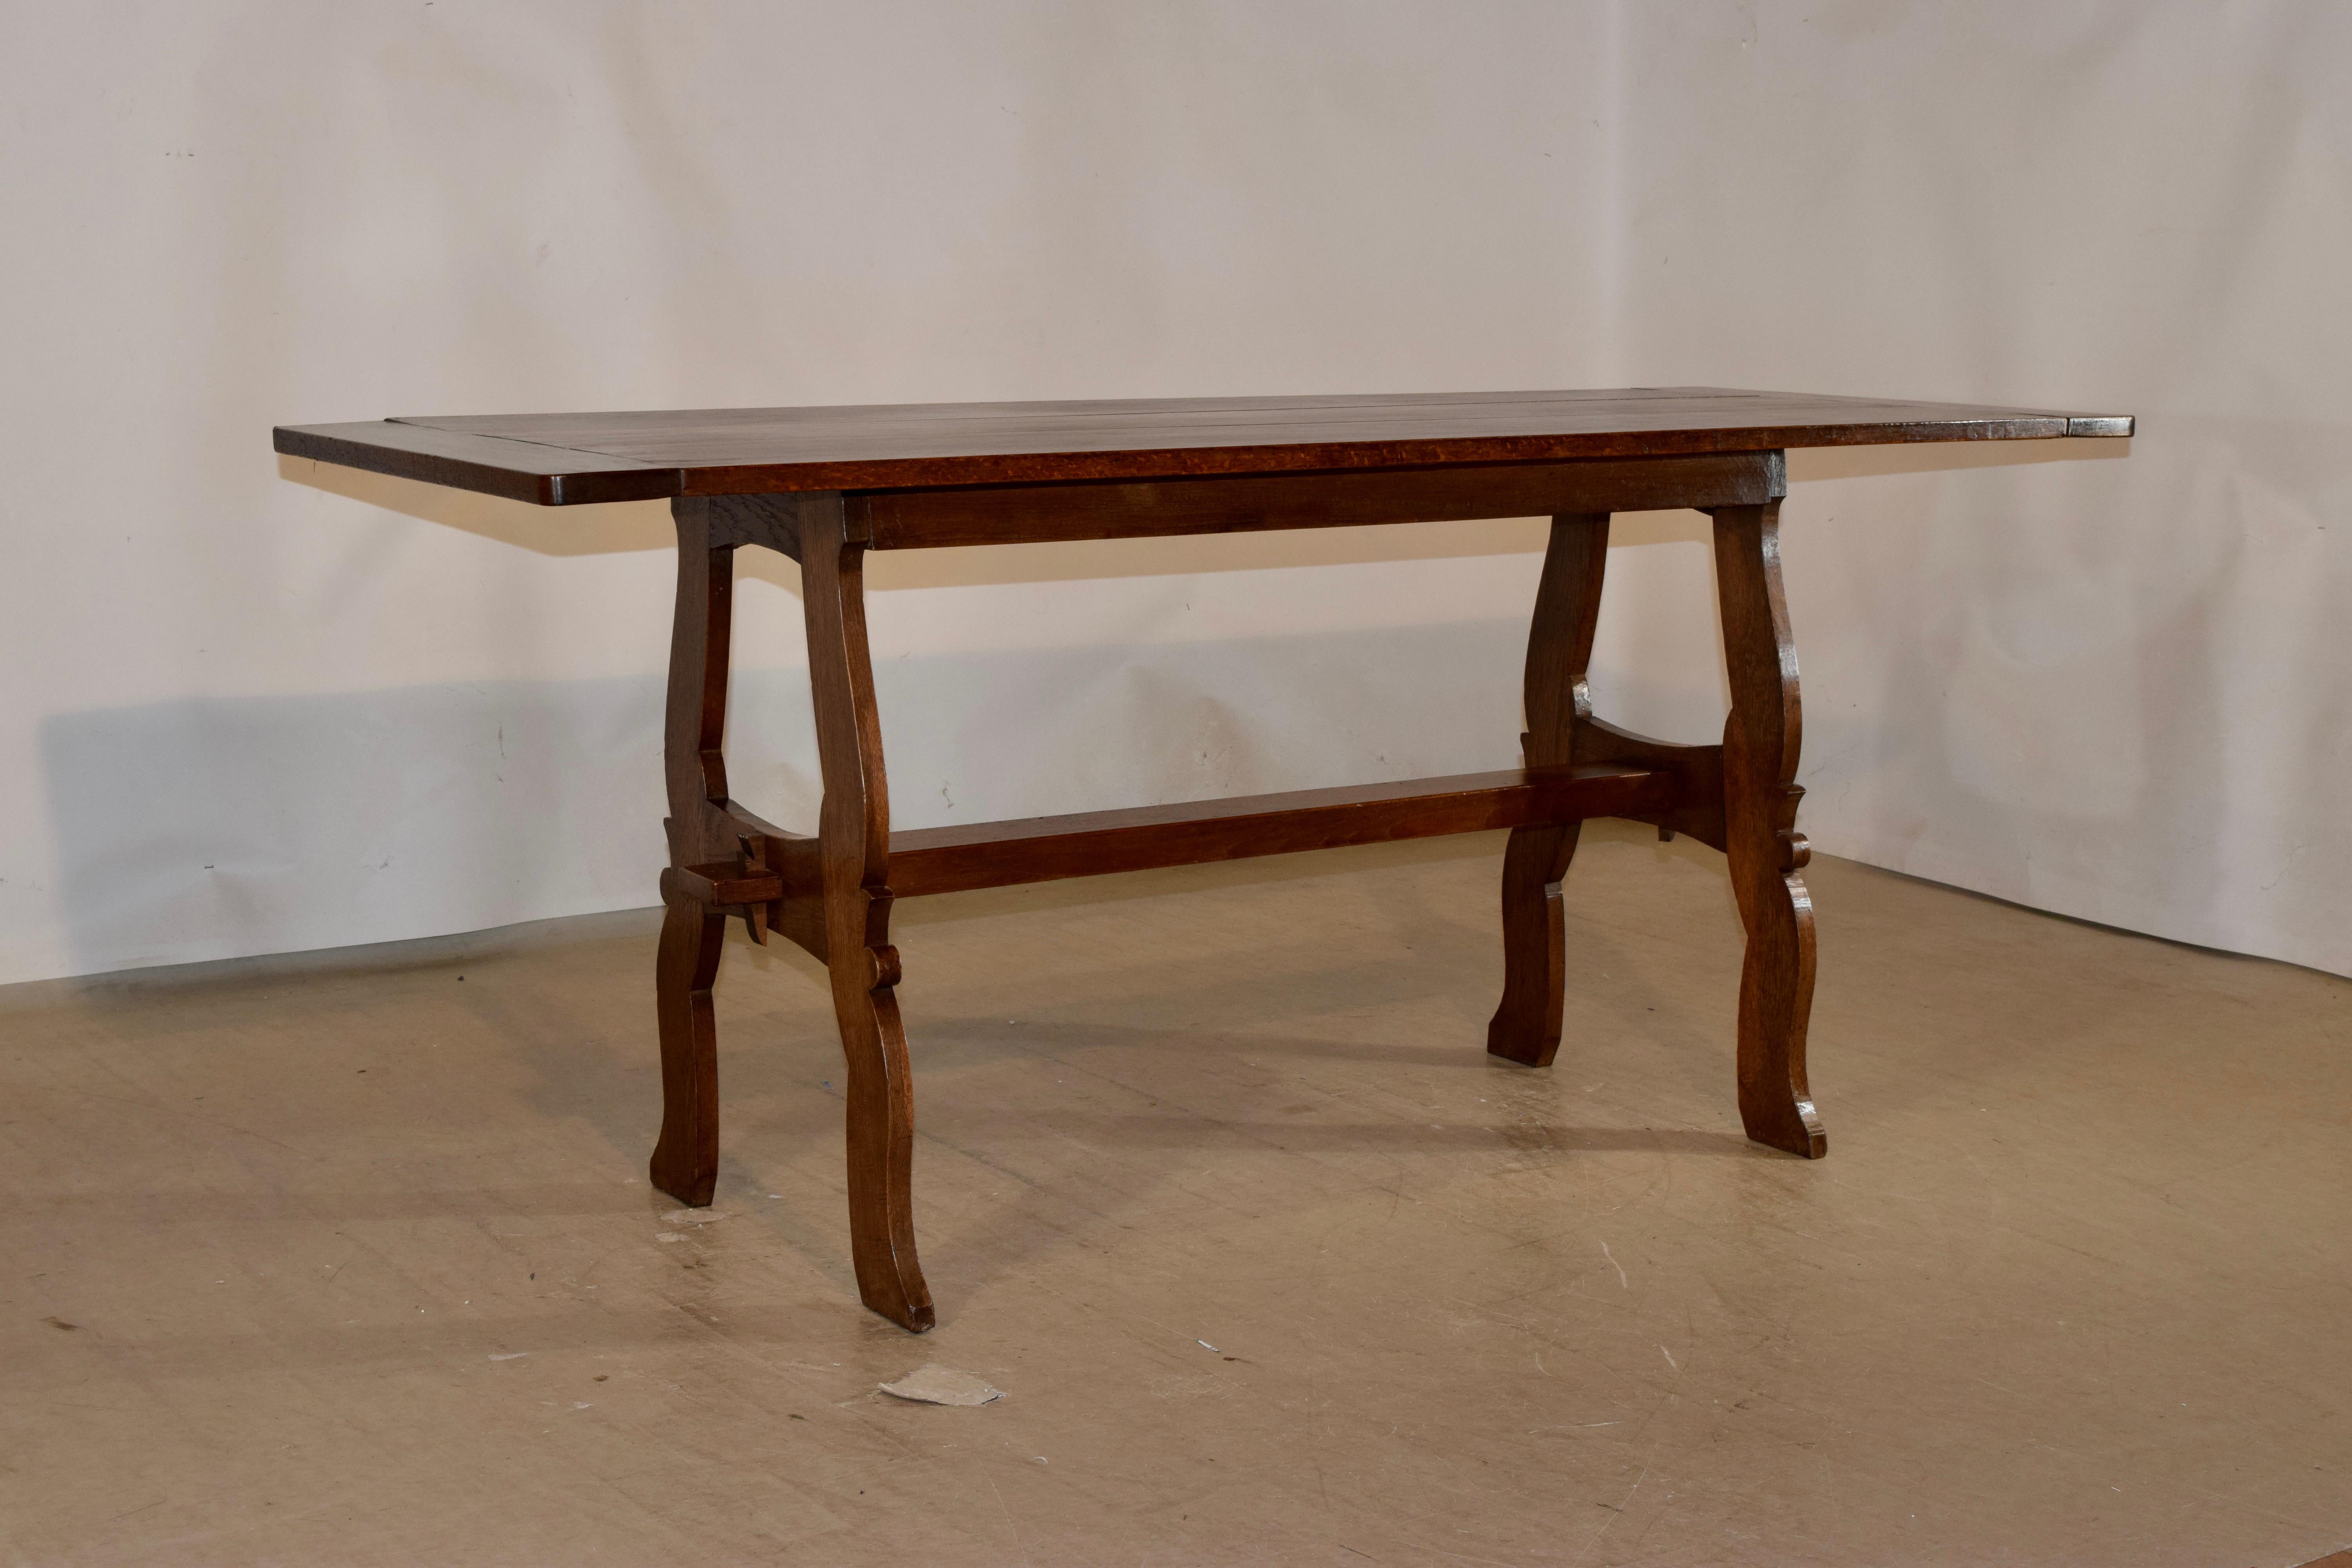 Late 19th century oak table from France with a three board top which has banded ends, supported on a very simple apron and supported on scalloped legs, joined by a simple stretcher. Gorgeous in its simplicity.